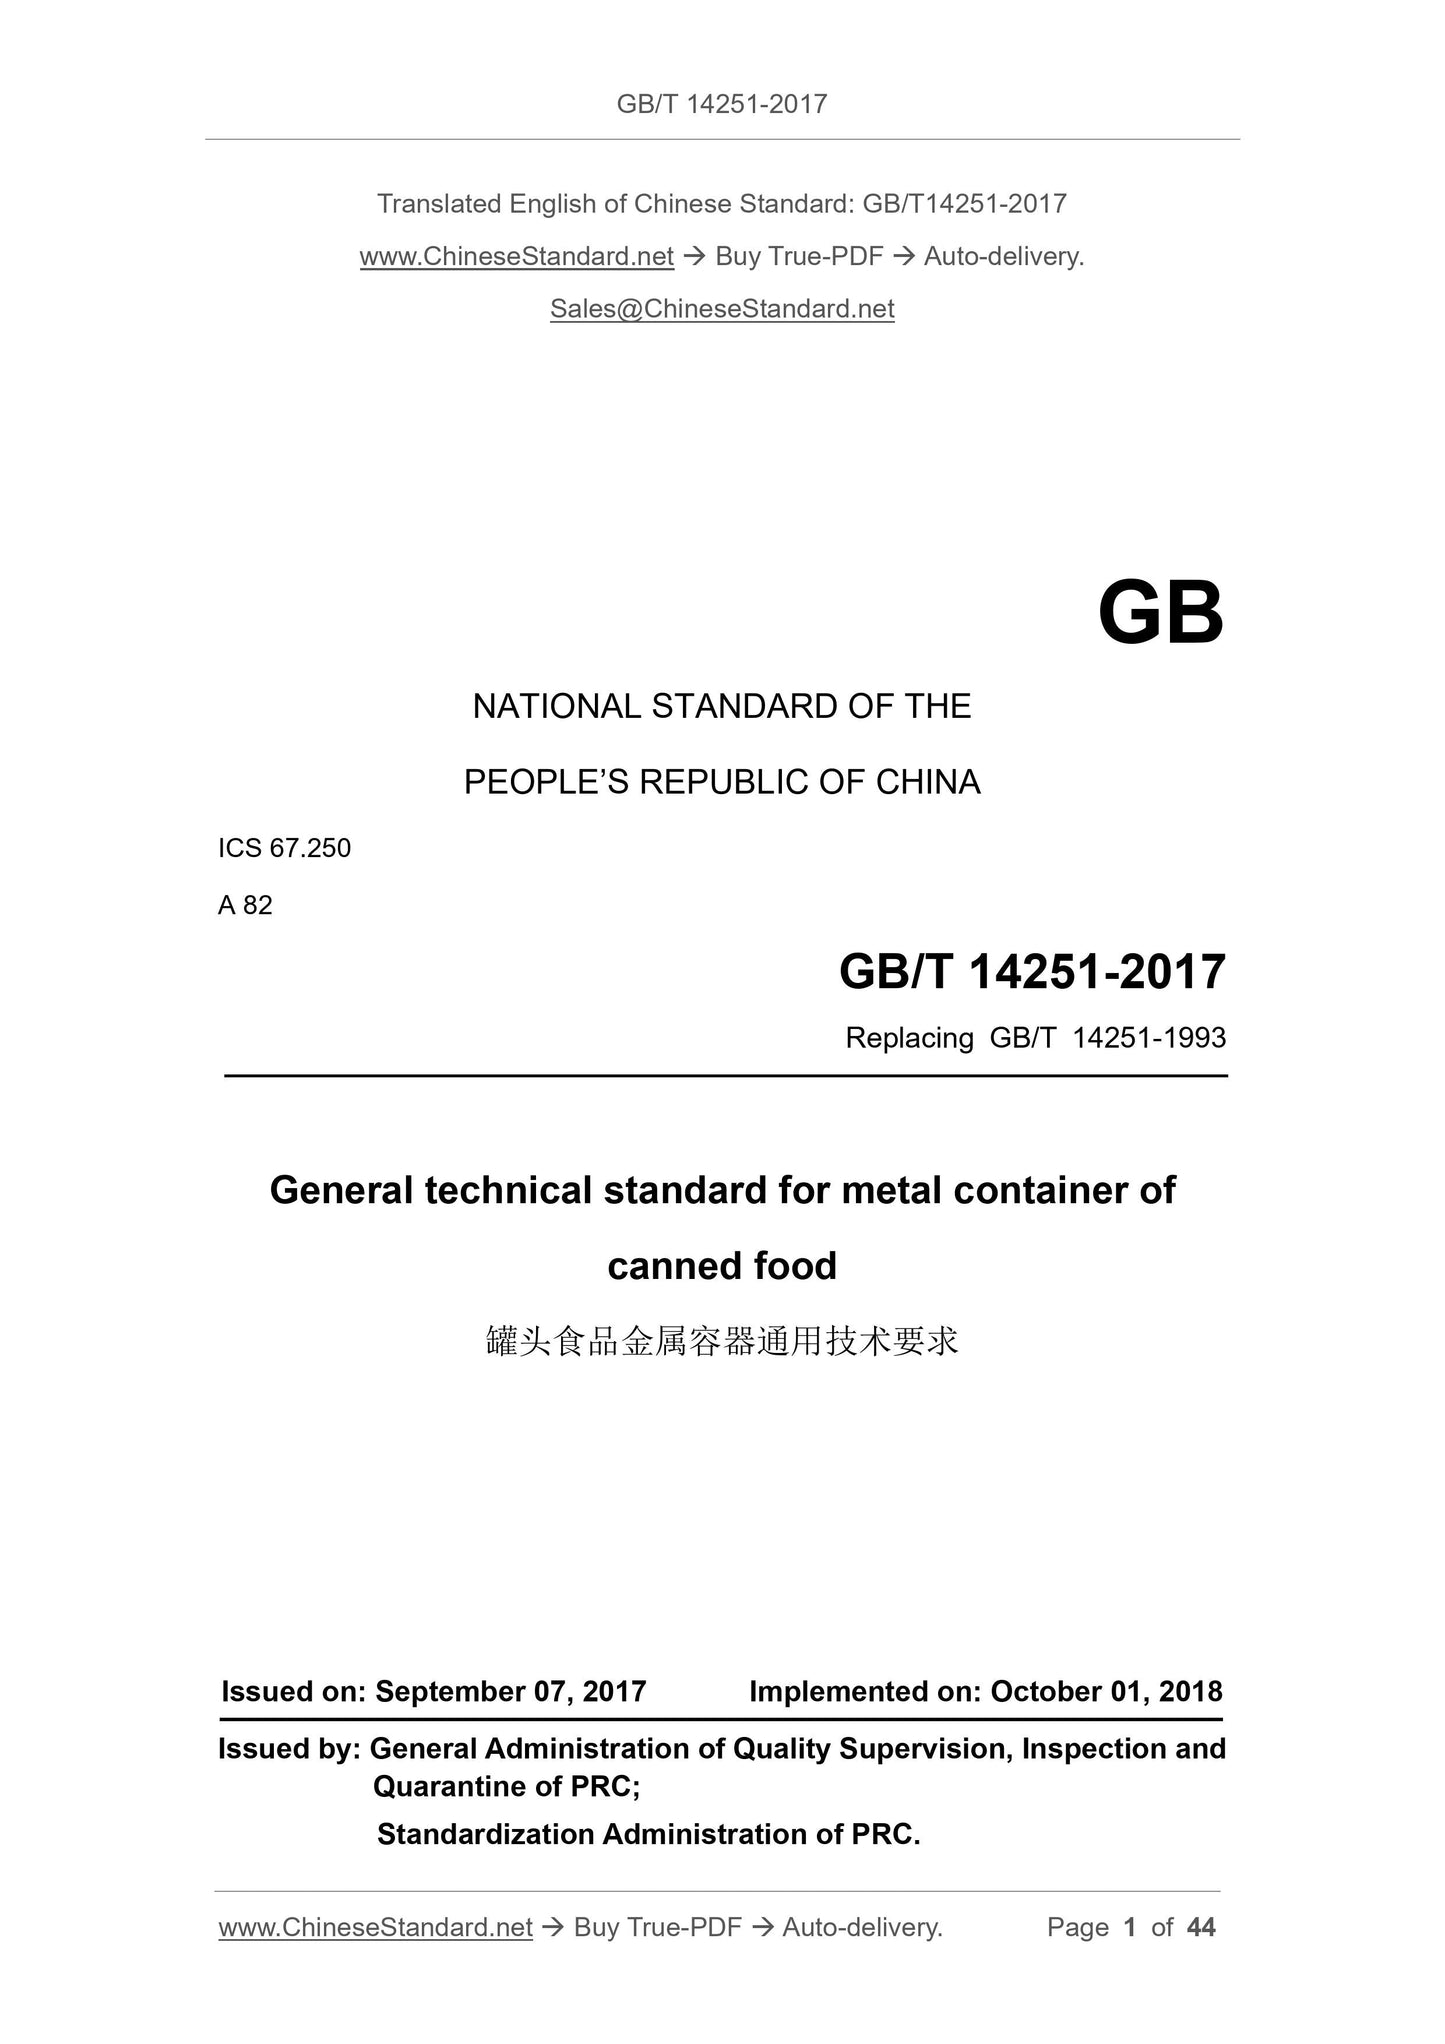 GB/T 14251-2017 Page 1